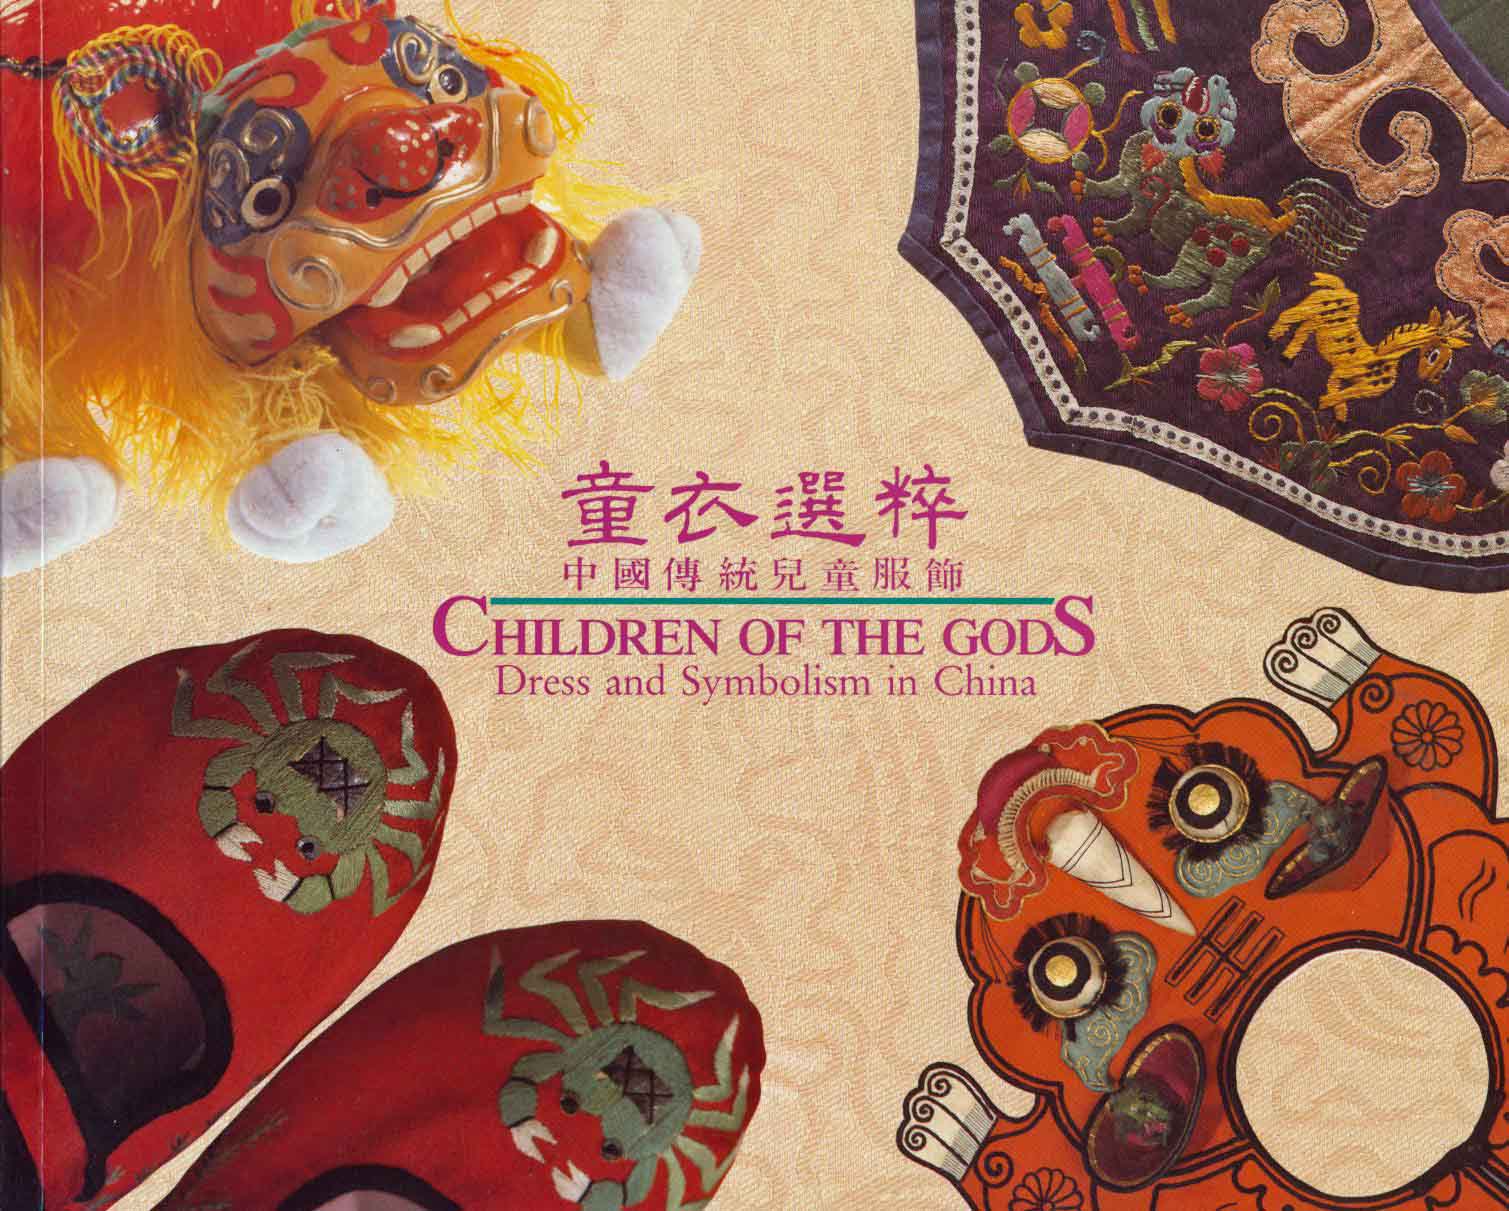 Ping, Joseph S.P. - Children of the Gods: Dress and Symbolism in China